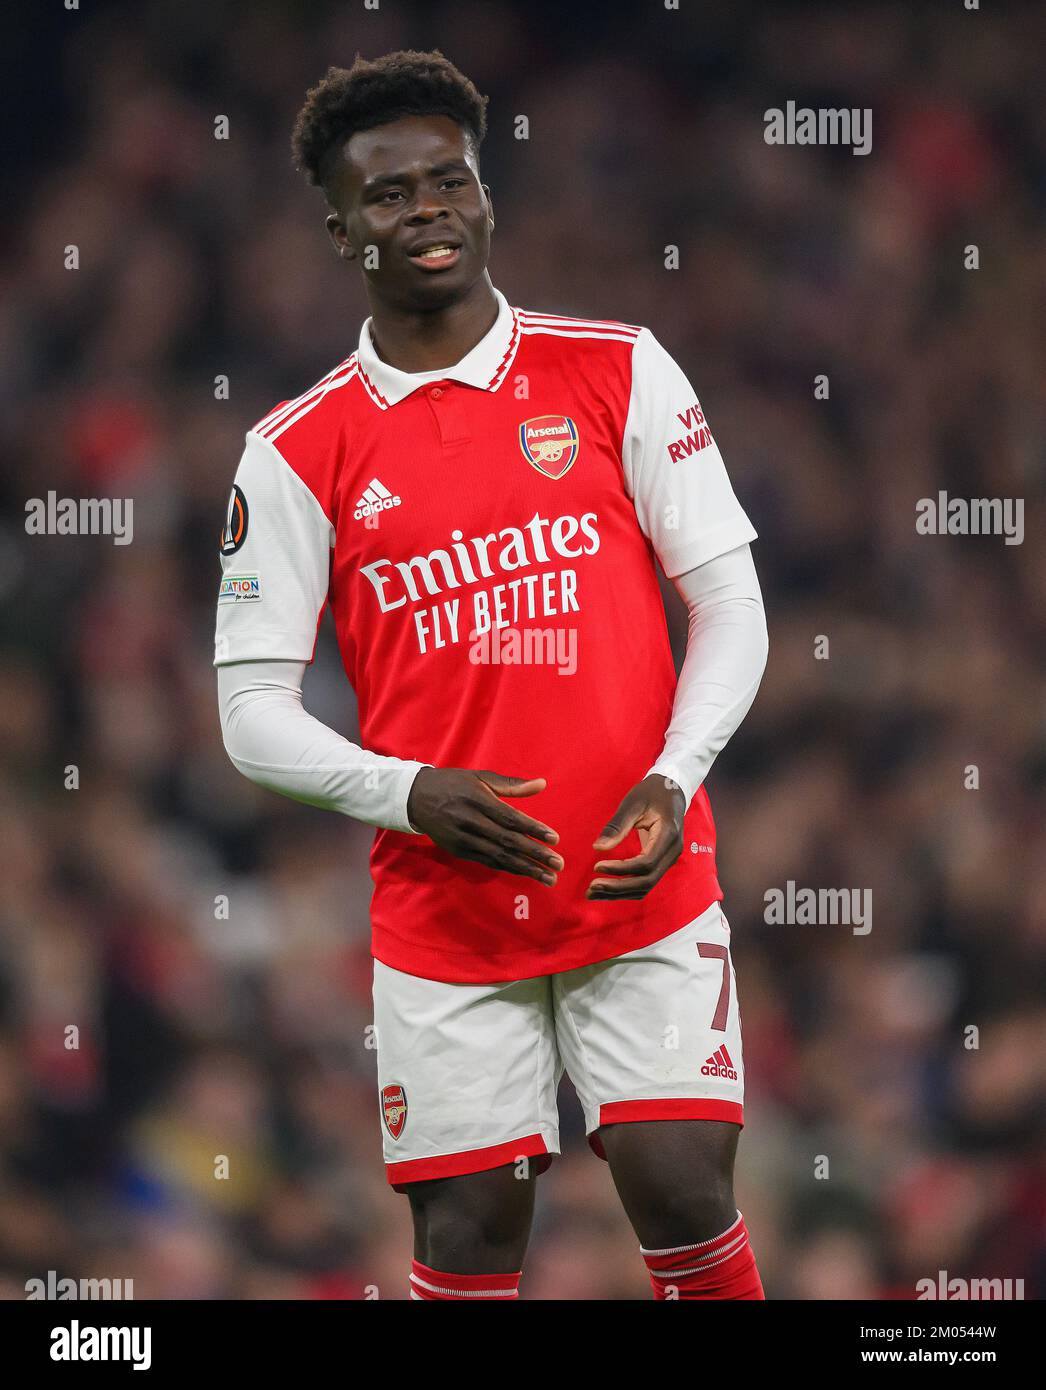 03 Nov 2022 - Arsenal v FC Zurich - UEFA Europa League - Group A - Emirates Stadium   Arsenal's Bukyo Saka during the match against FC Zurich Picture : Mark Pain / Alamy Stock Photo